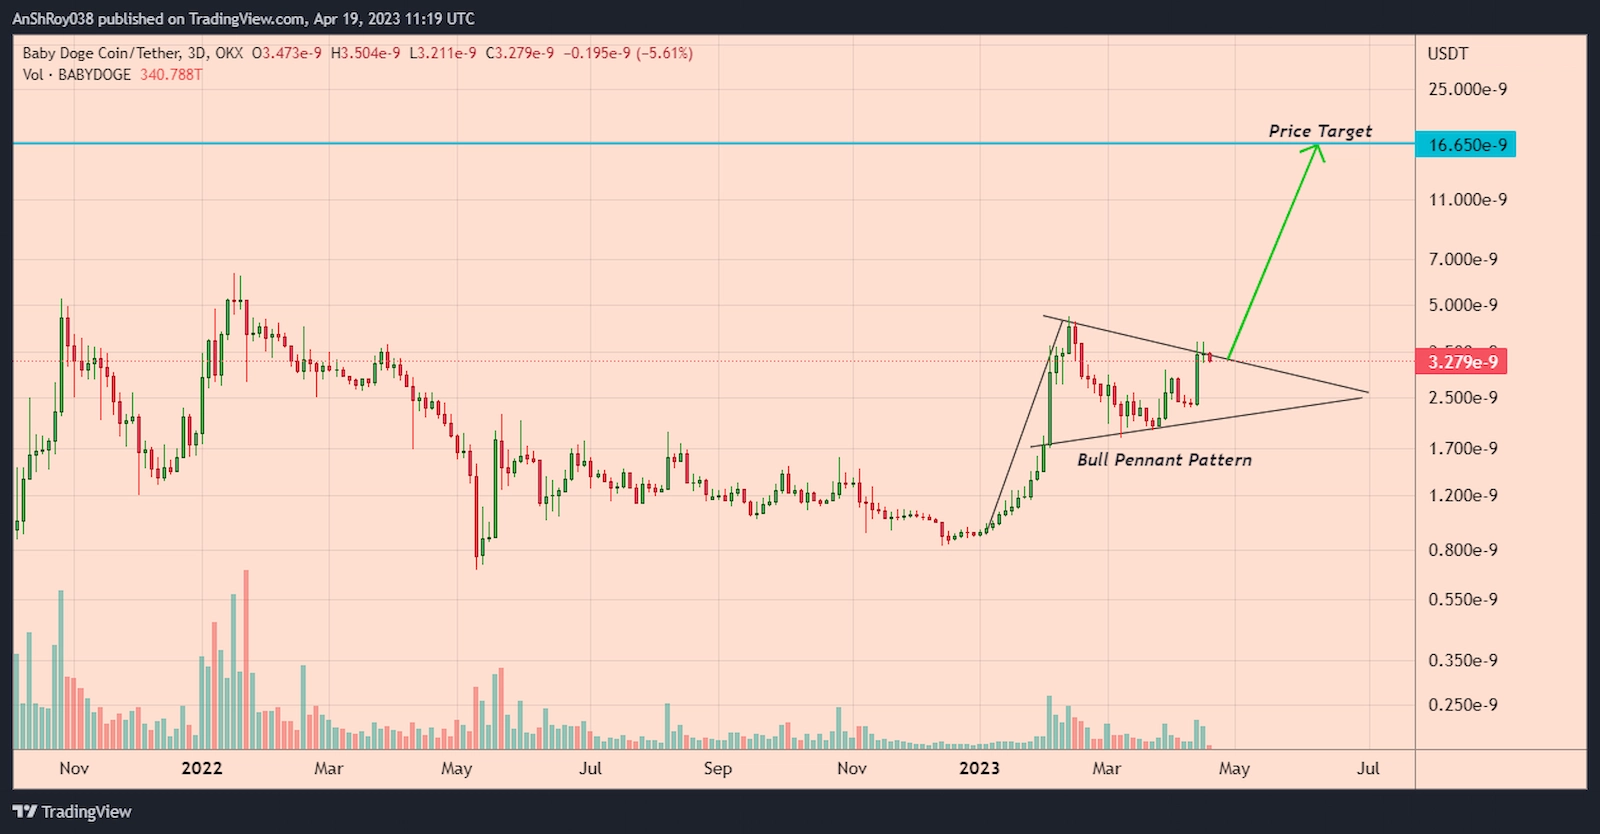 BABYDOGE price formed a bullish pattern with a 407% price target